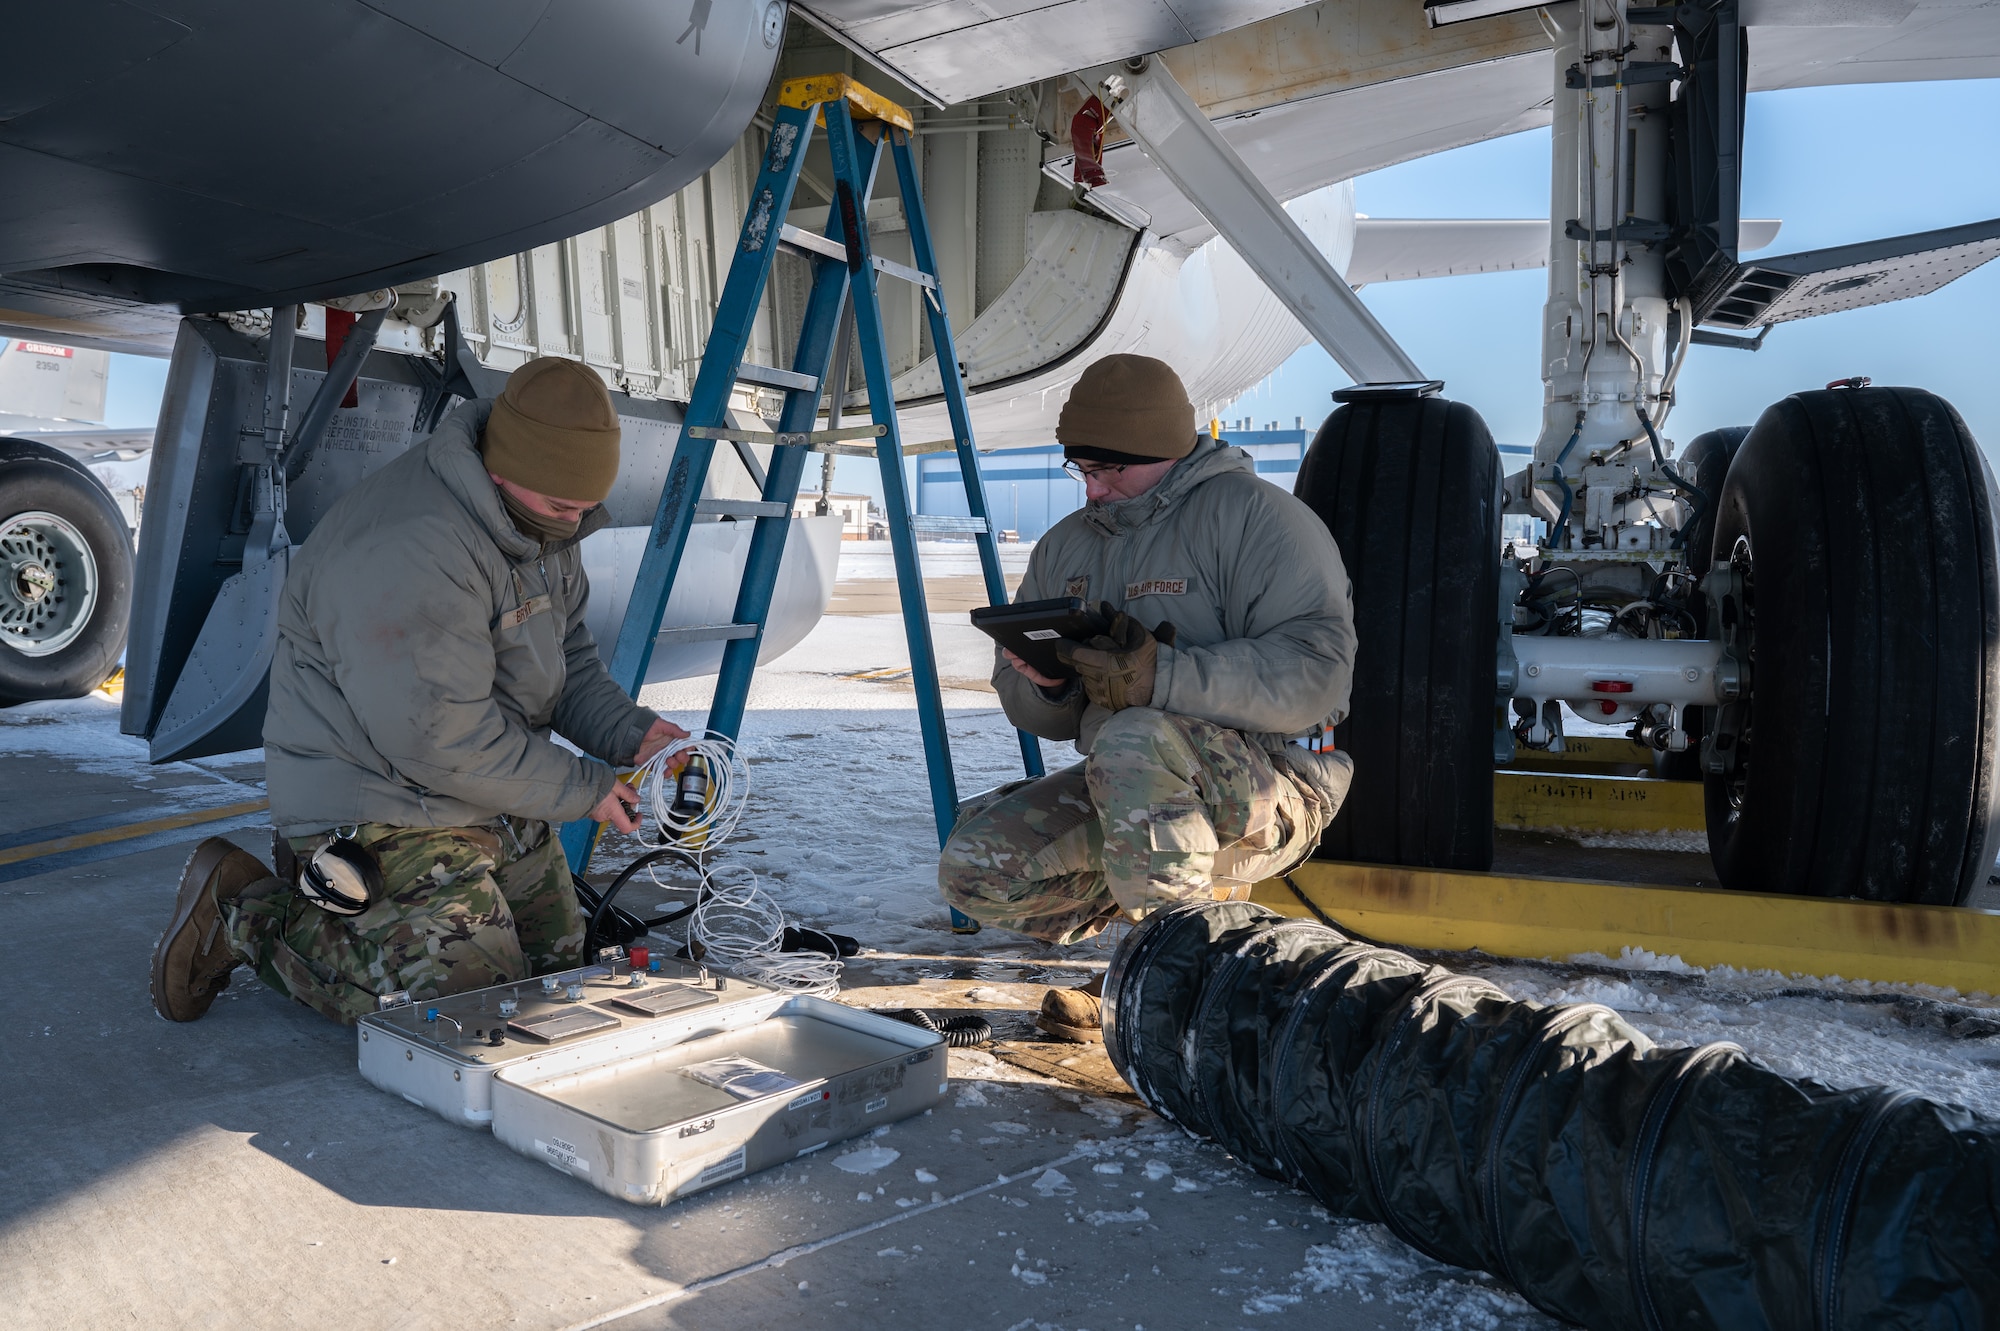 Tech. Sgt. Adrian Bryant, 434th Aircraft Maintenance Squadron aircraft electrical and environmental technician, left, and Staff Sgt. Michael Pascual, 434th Aircraft Maintenance Squadron aircraft electrical and environmental apprentice, set up a control box to test the anti-skid system of a KC-135R Stratotanker.